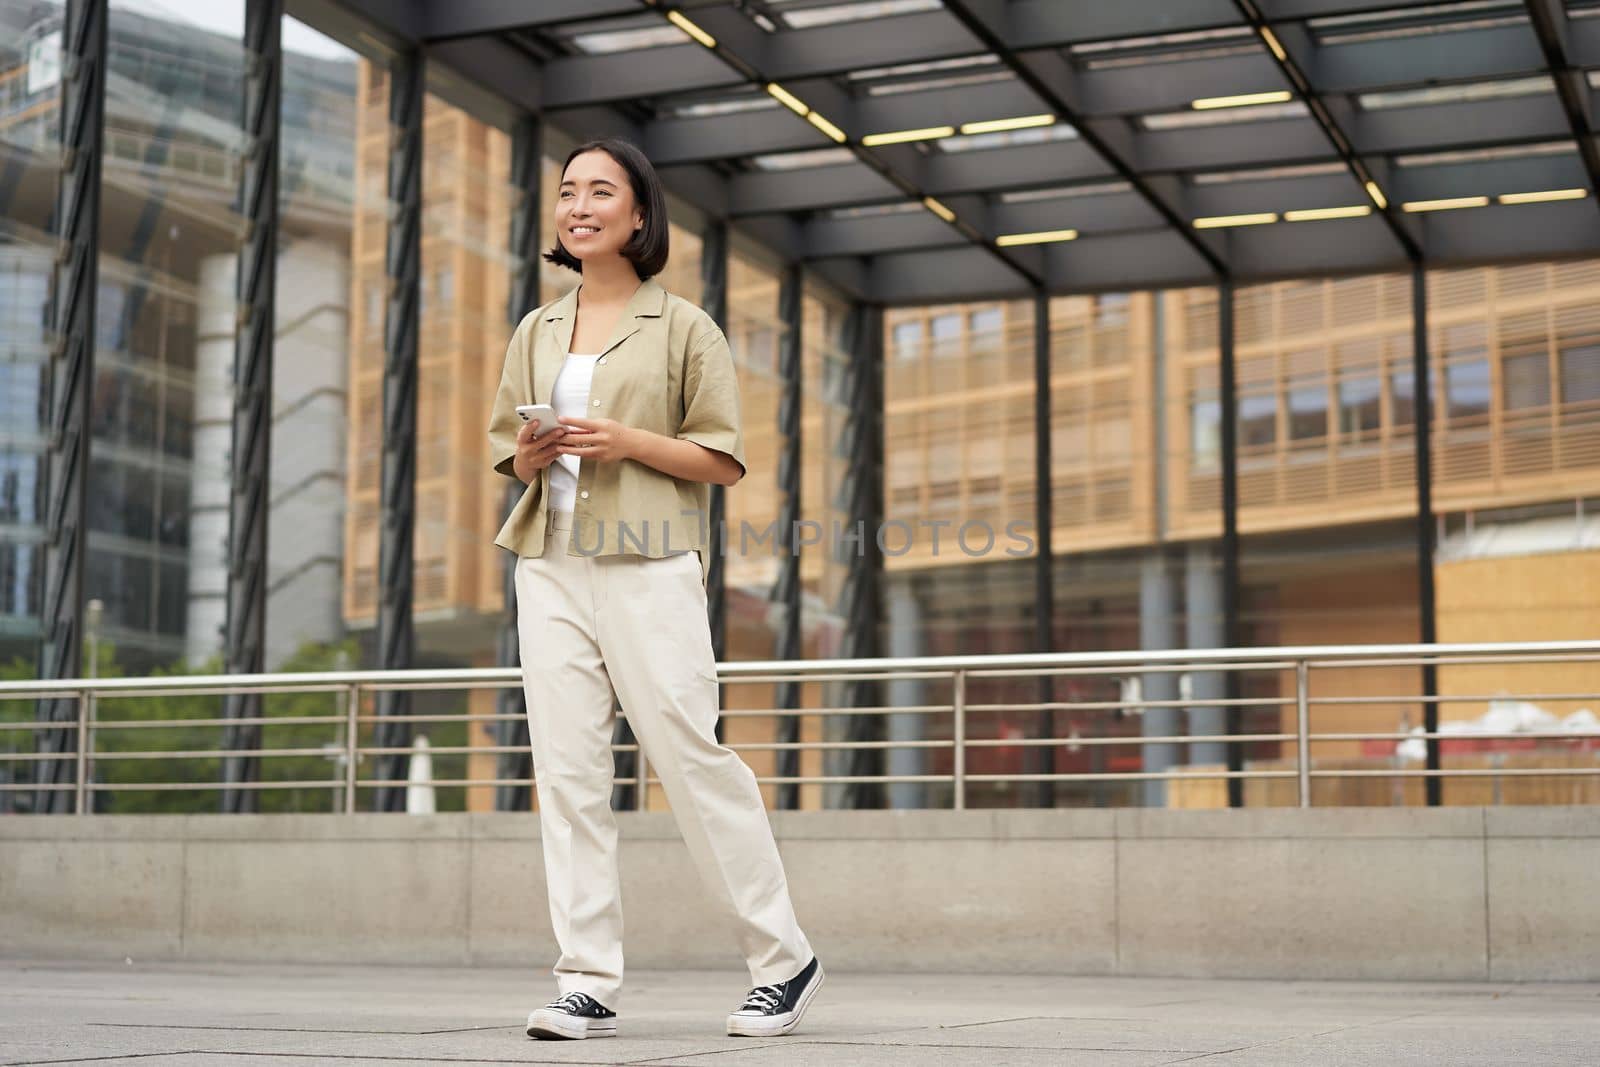 Portrait of young asian woman, student with smartphone, standing on street near glass building, waiting for someone.